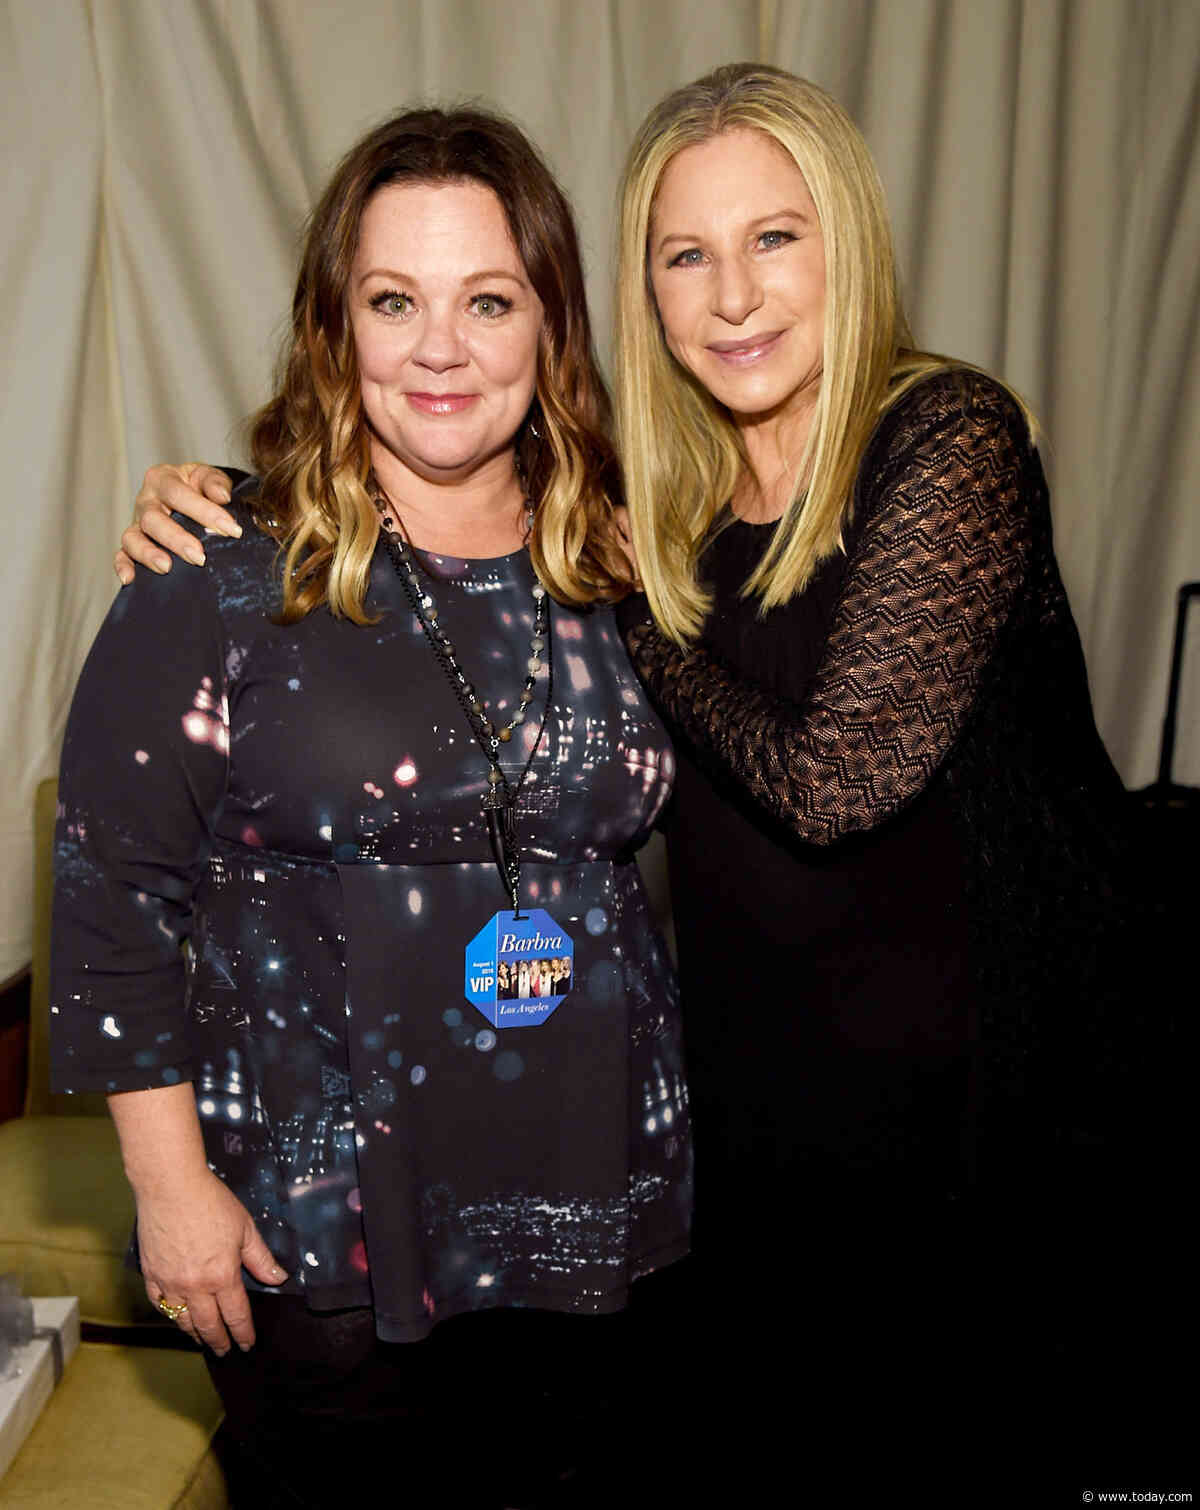 Barbra Streisand asked Melissa McCarthy if she took Ozempic. Here's her explanation for the comment